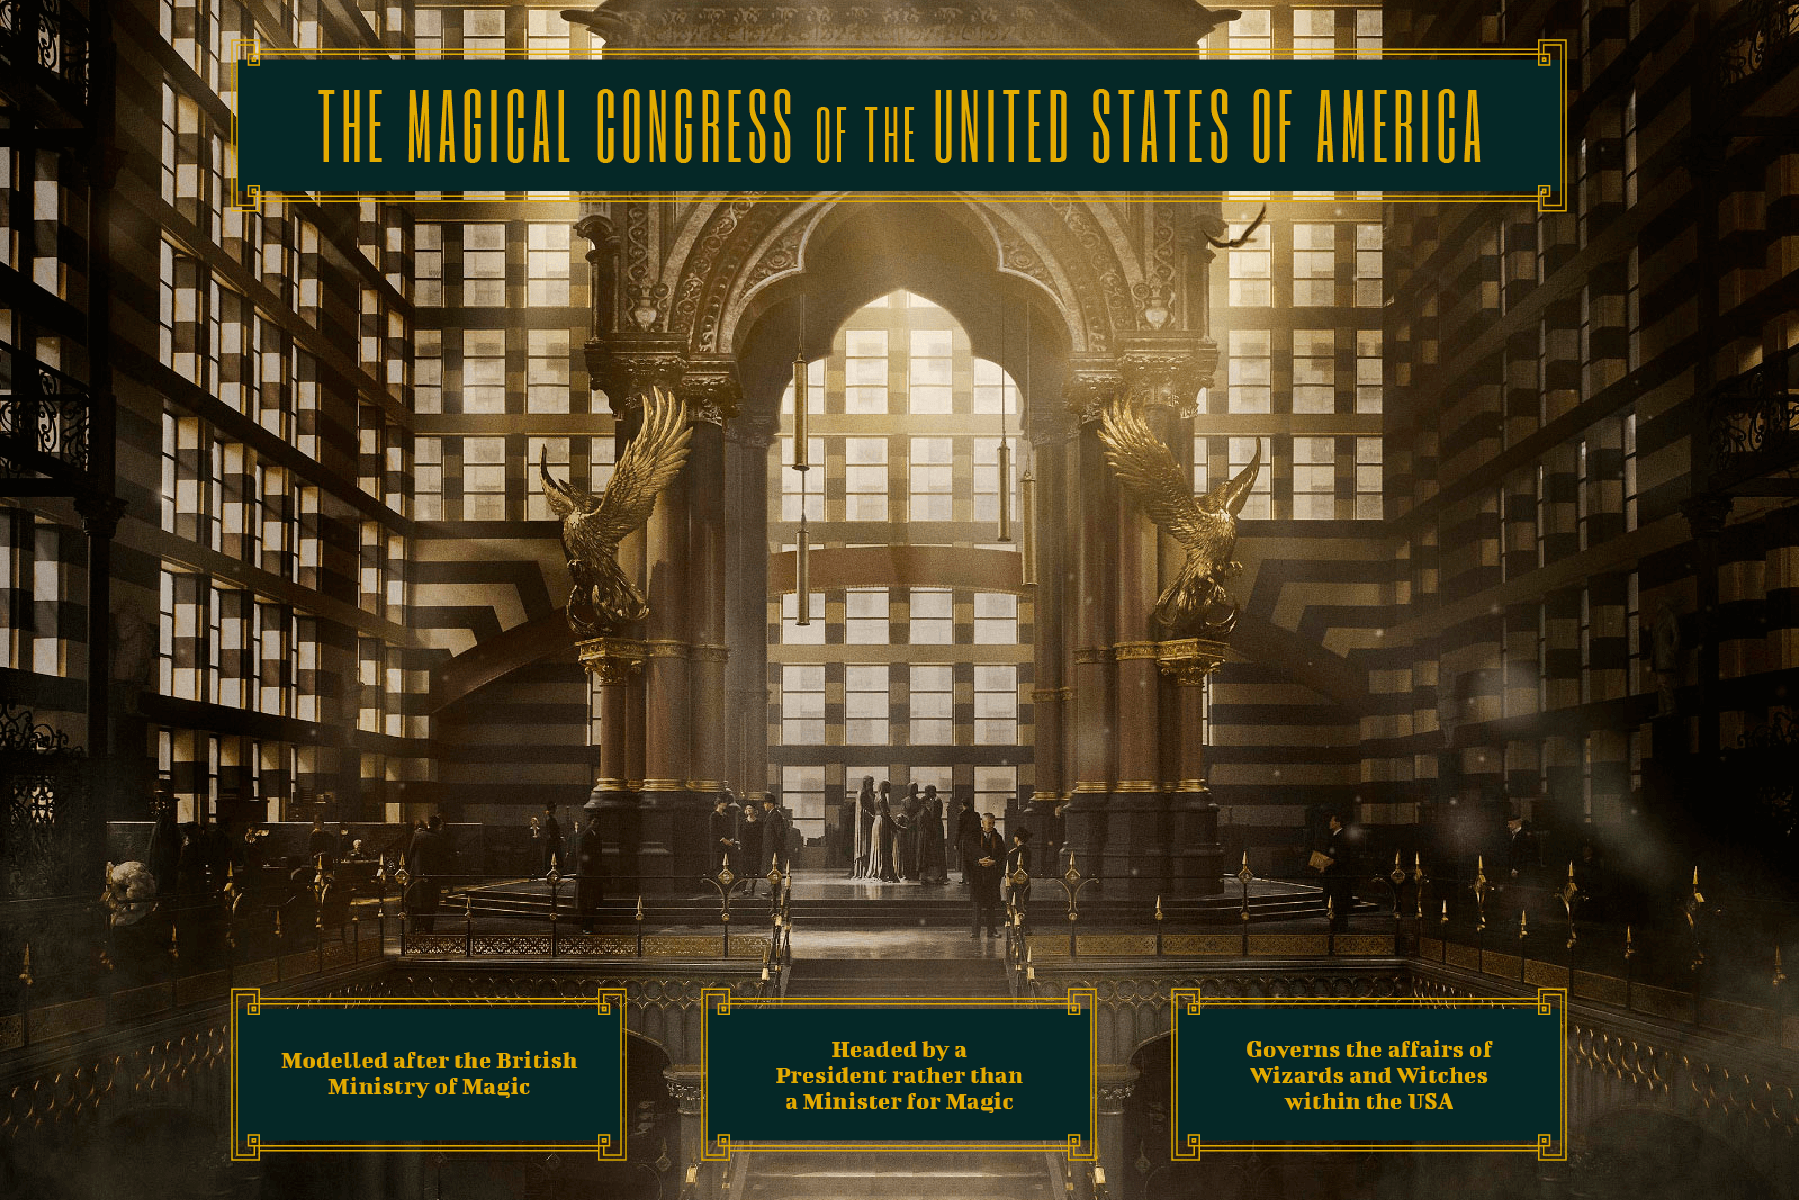 The Magical Congress Of The United States Of America. Modelled after the British Ministry of Magic. Headed by a President rather than a Minister for Magic. Governs the affairs of Wizards and Witches within the USA.